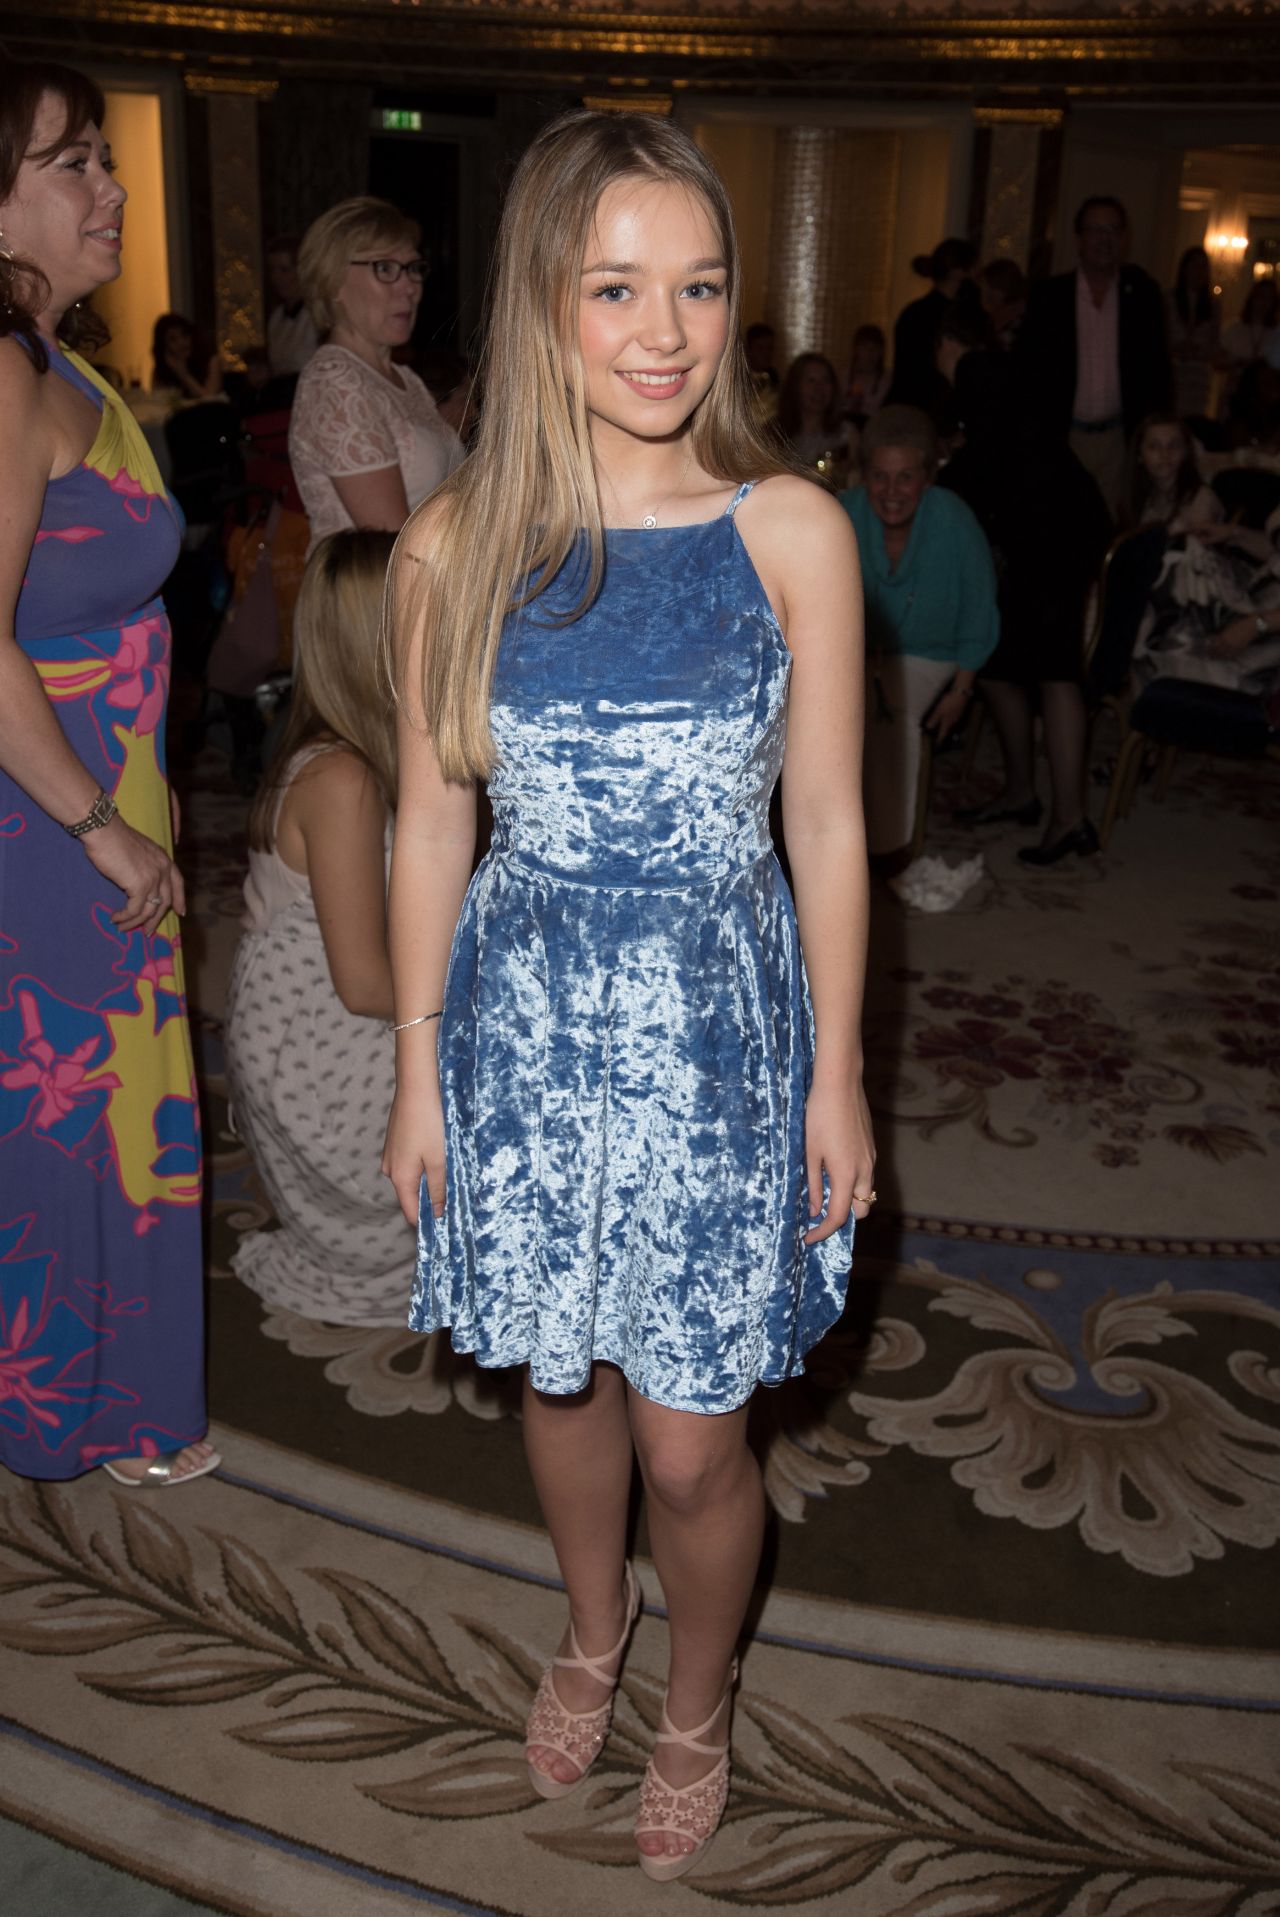 The Shooting Star Chase Ball held at the Dorchester. Featuring: Connie  Talbot Where: London, United Kingdom When: 01 Oct 2016 Stock Photo - Alamy